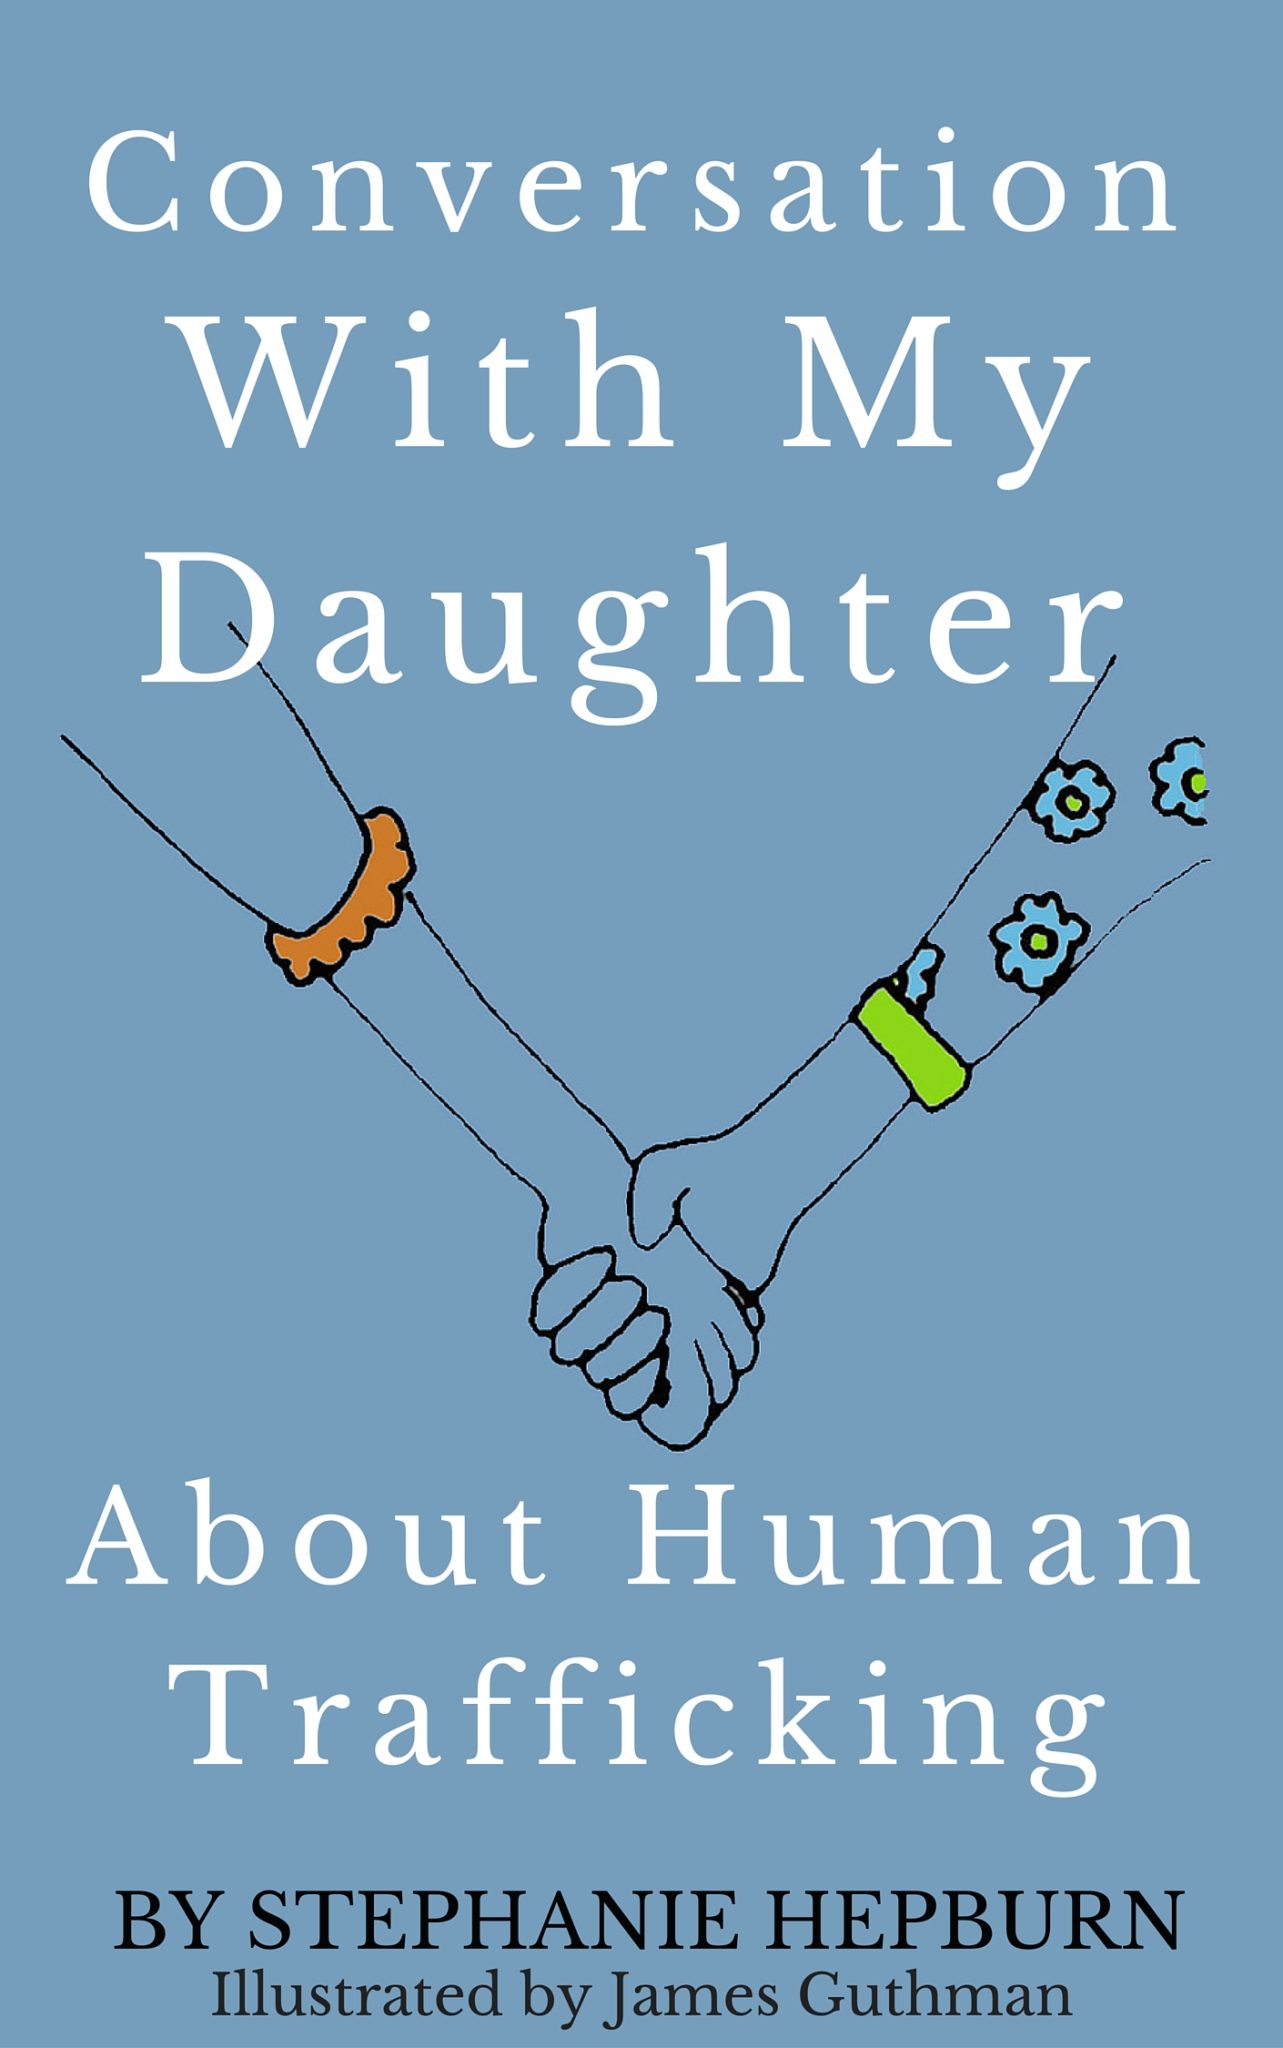 FREE: Conversation With My Daughter About Human Trafficking by Stephanie Hepburn